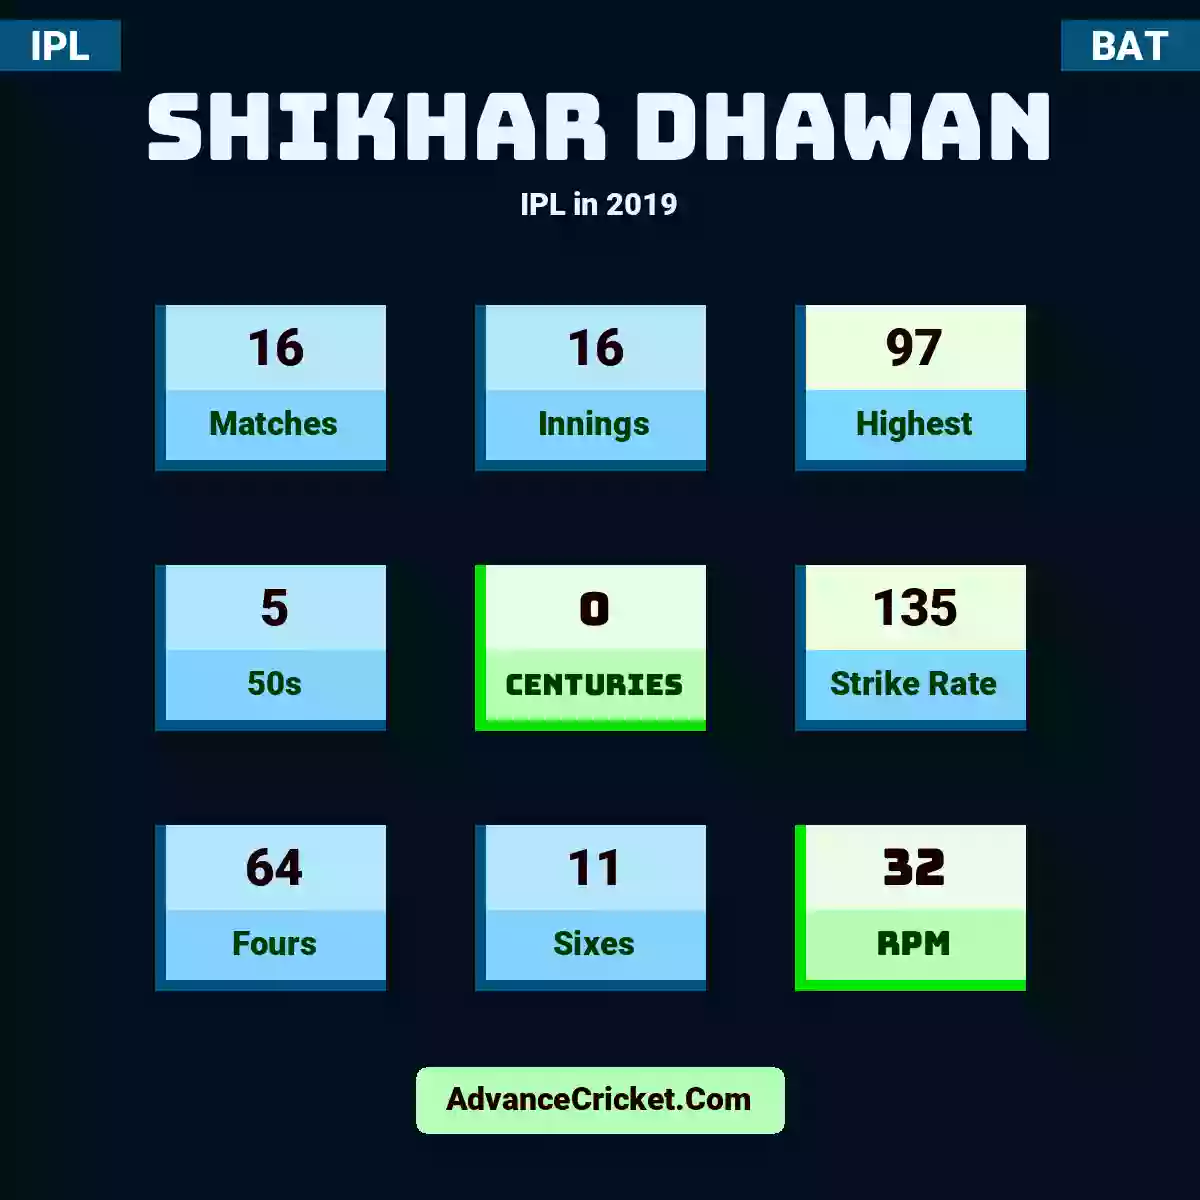 Shikhar Dhawan IPL  in 2019, Shikhar Dhawan played 16 matches, scored 97 runs as highest, 5 half-centuries, and 0 centuries, with a strike rate of 135. S.Dhawan hit 64 fours and 11 sixes, with an RPM of 32.